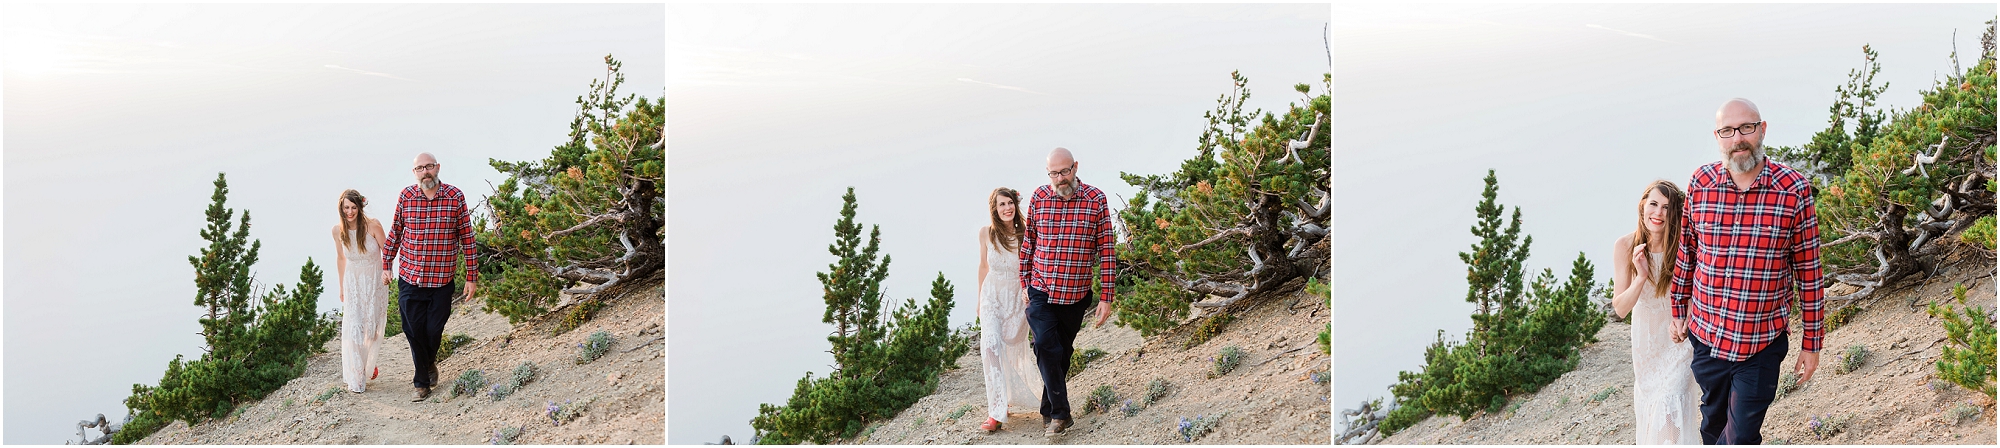 Smoke obscures Crater Lake as this bride and groom walk along the hiking trail at Cloud Cap Overlook after eloping. | Erica Swantek Photography